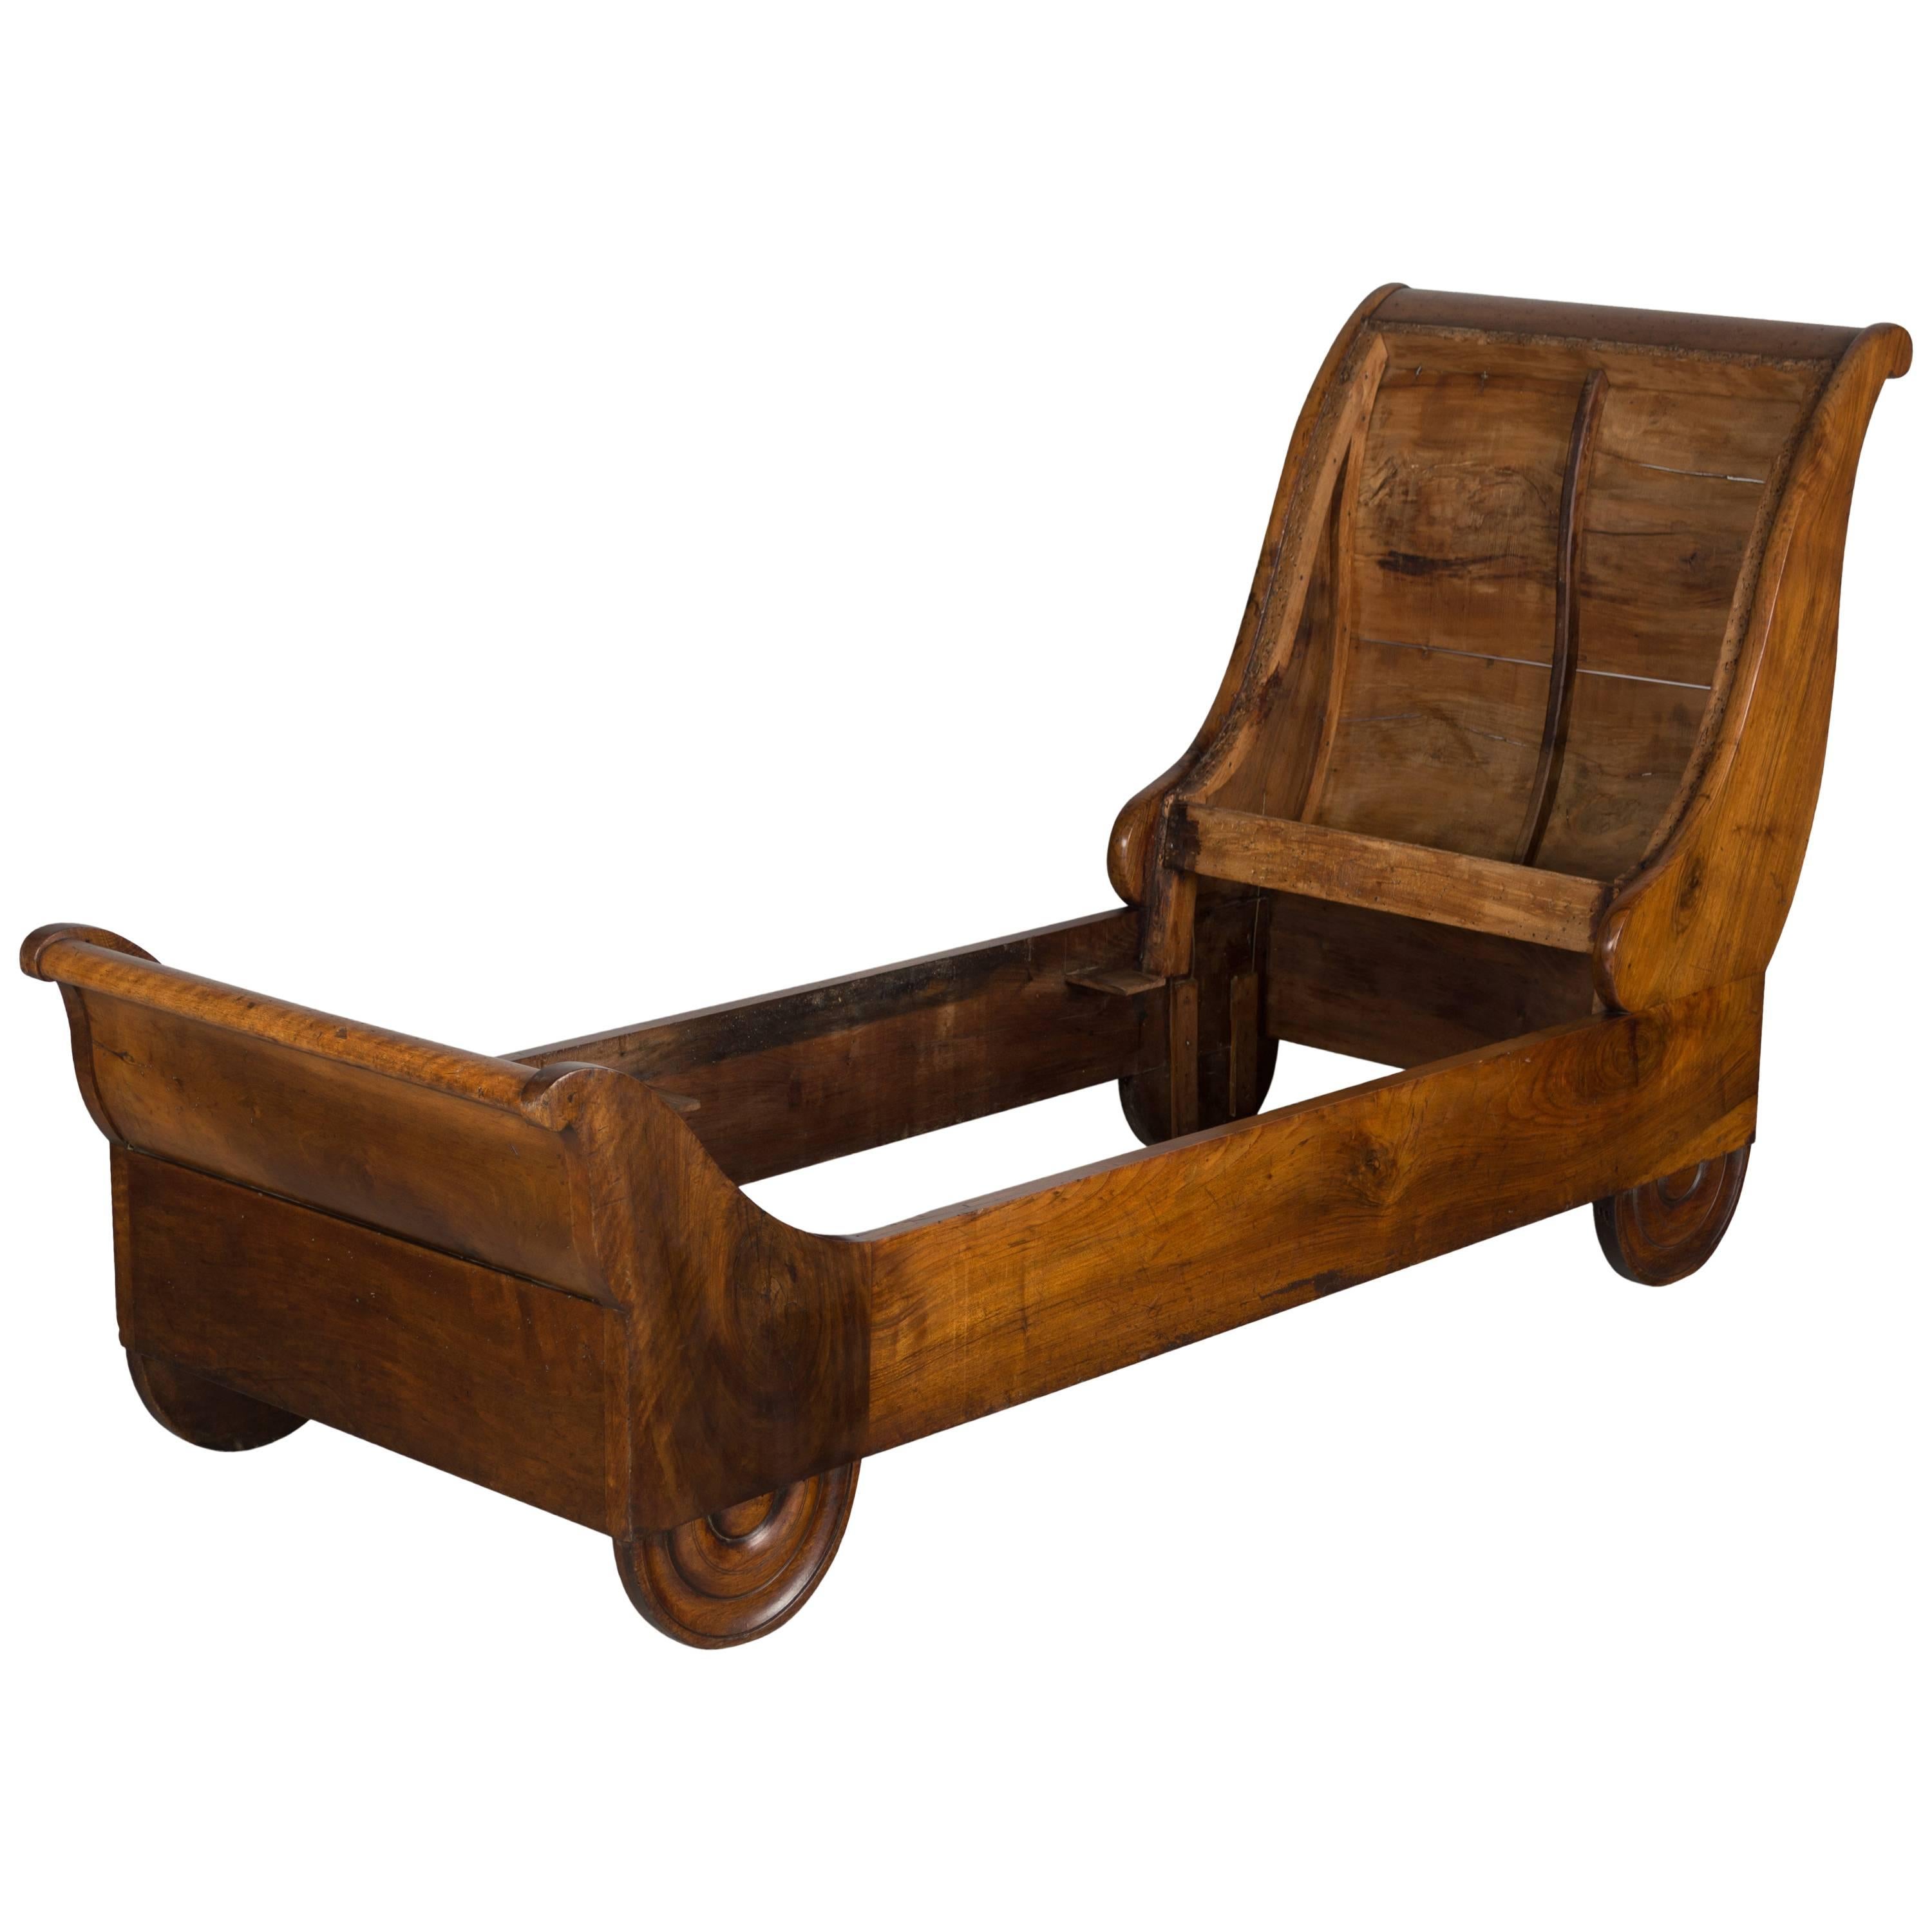 A fine early 19th century French Louis Philippe récamier, or daybed. Made of solid walnut with beautiful choice of wood, having large knots and nice grain with waxed finish. This sturdy well-constructed frame retains the original horsehair seat and